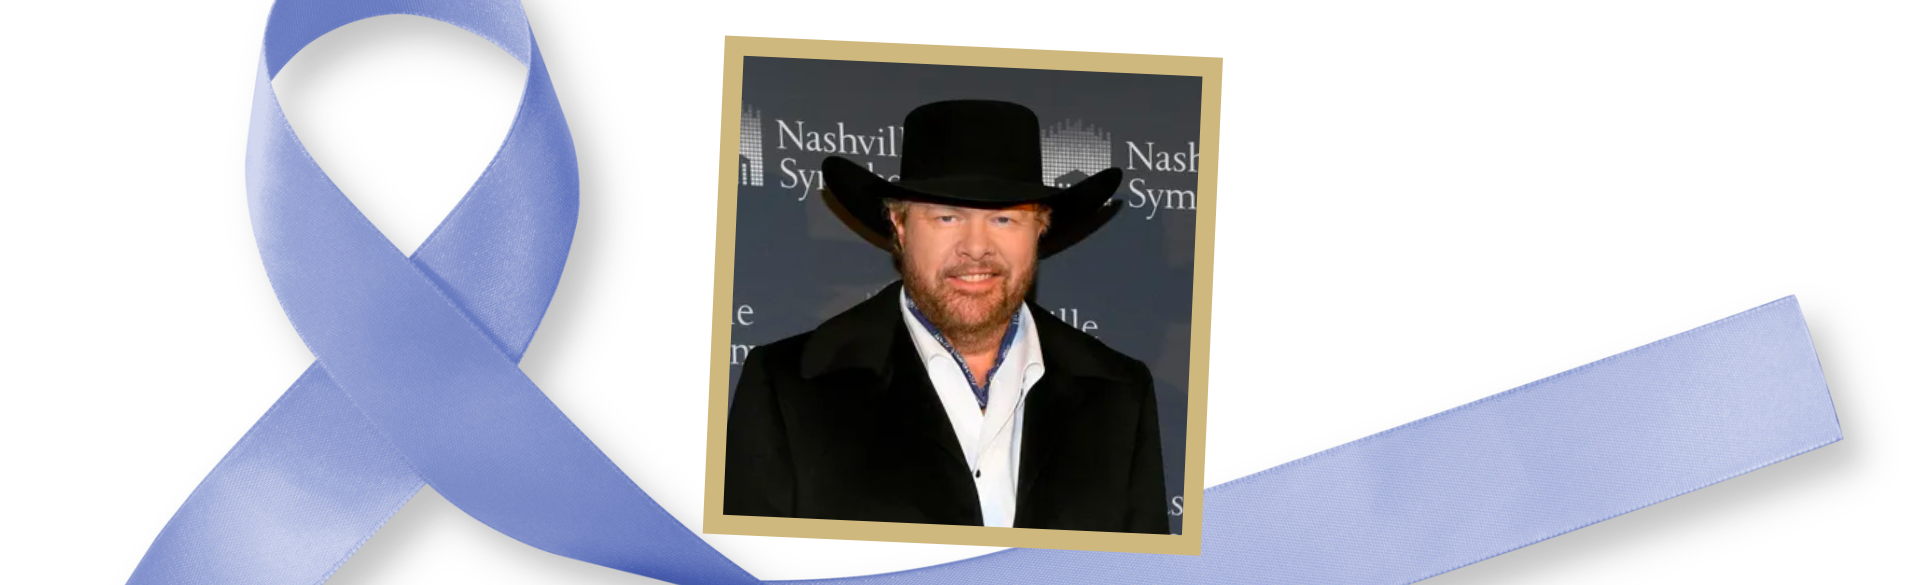 Toby Keith Shares Health Update on Cancer Battle - Parade